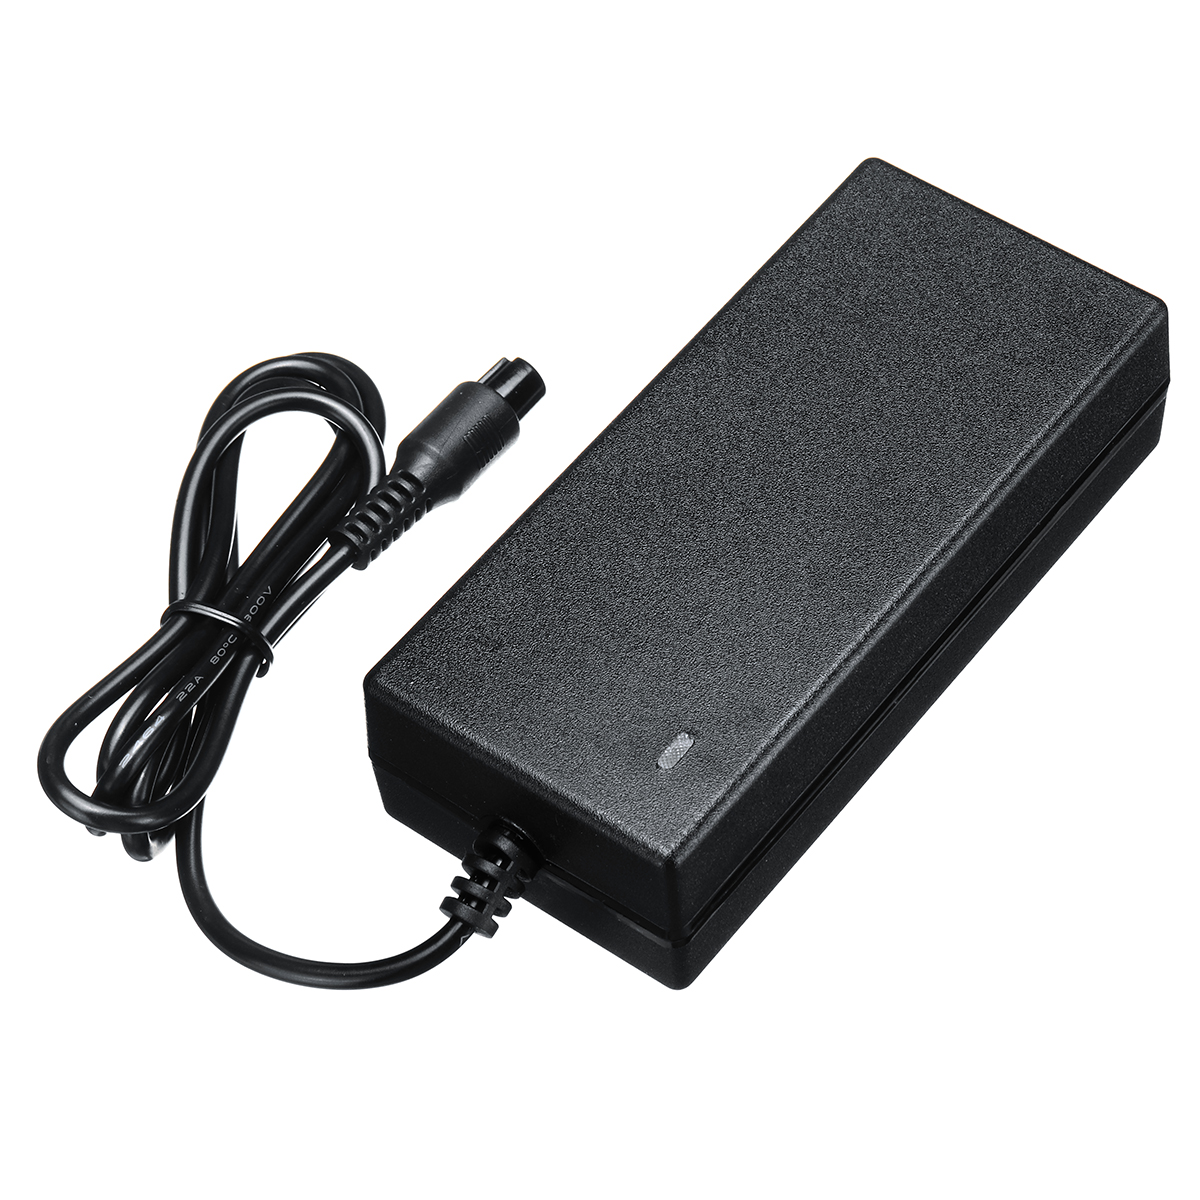 42V-2A-Power-Adapter-Battery-Charger-For-2-Wheel-Electric-Balance-Scooter-UK-Plug-1368826-5